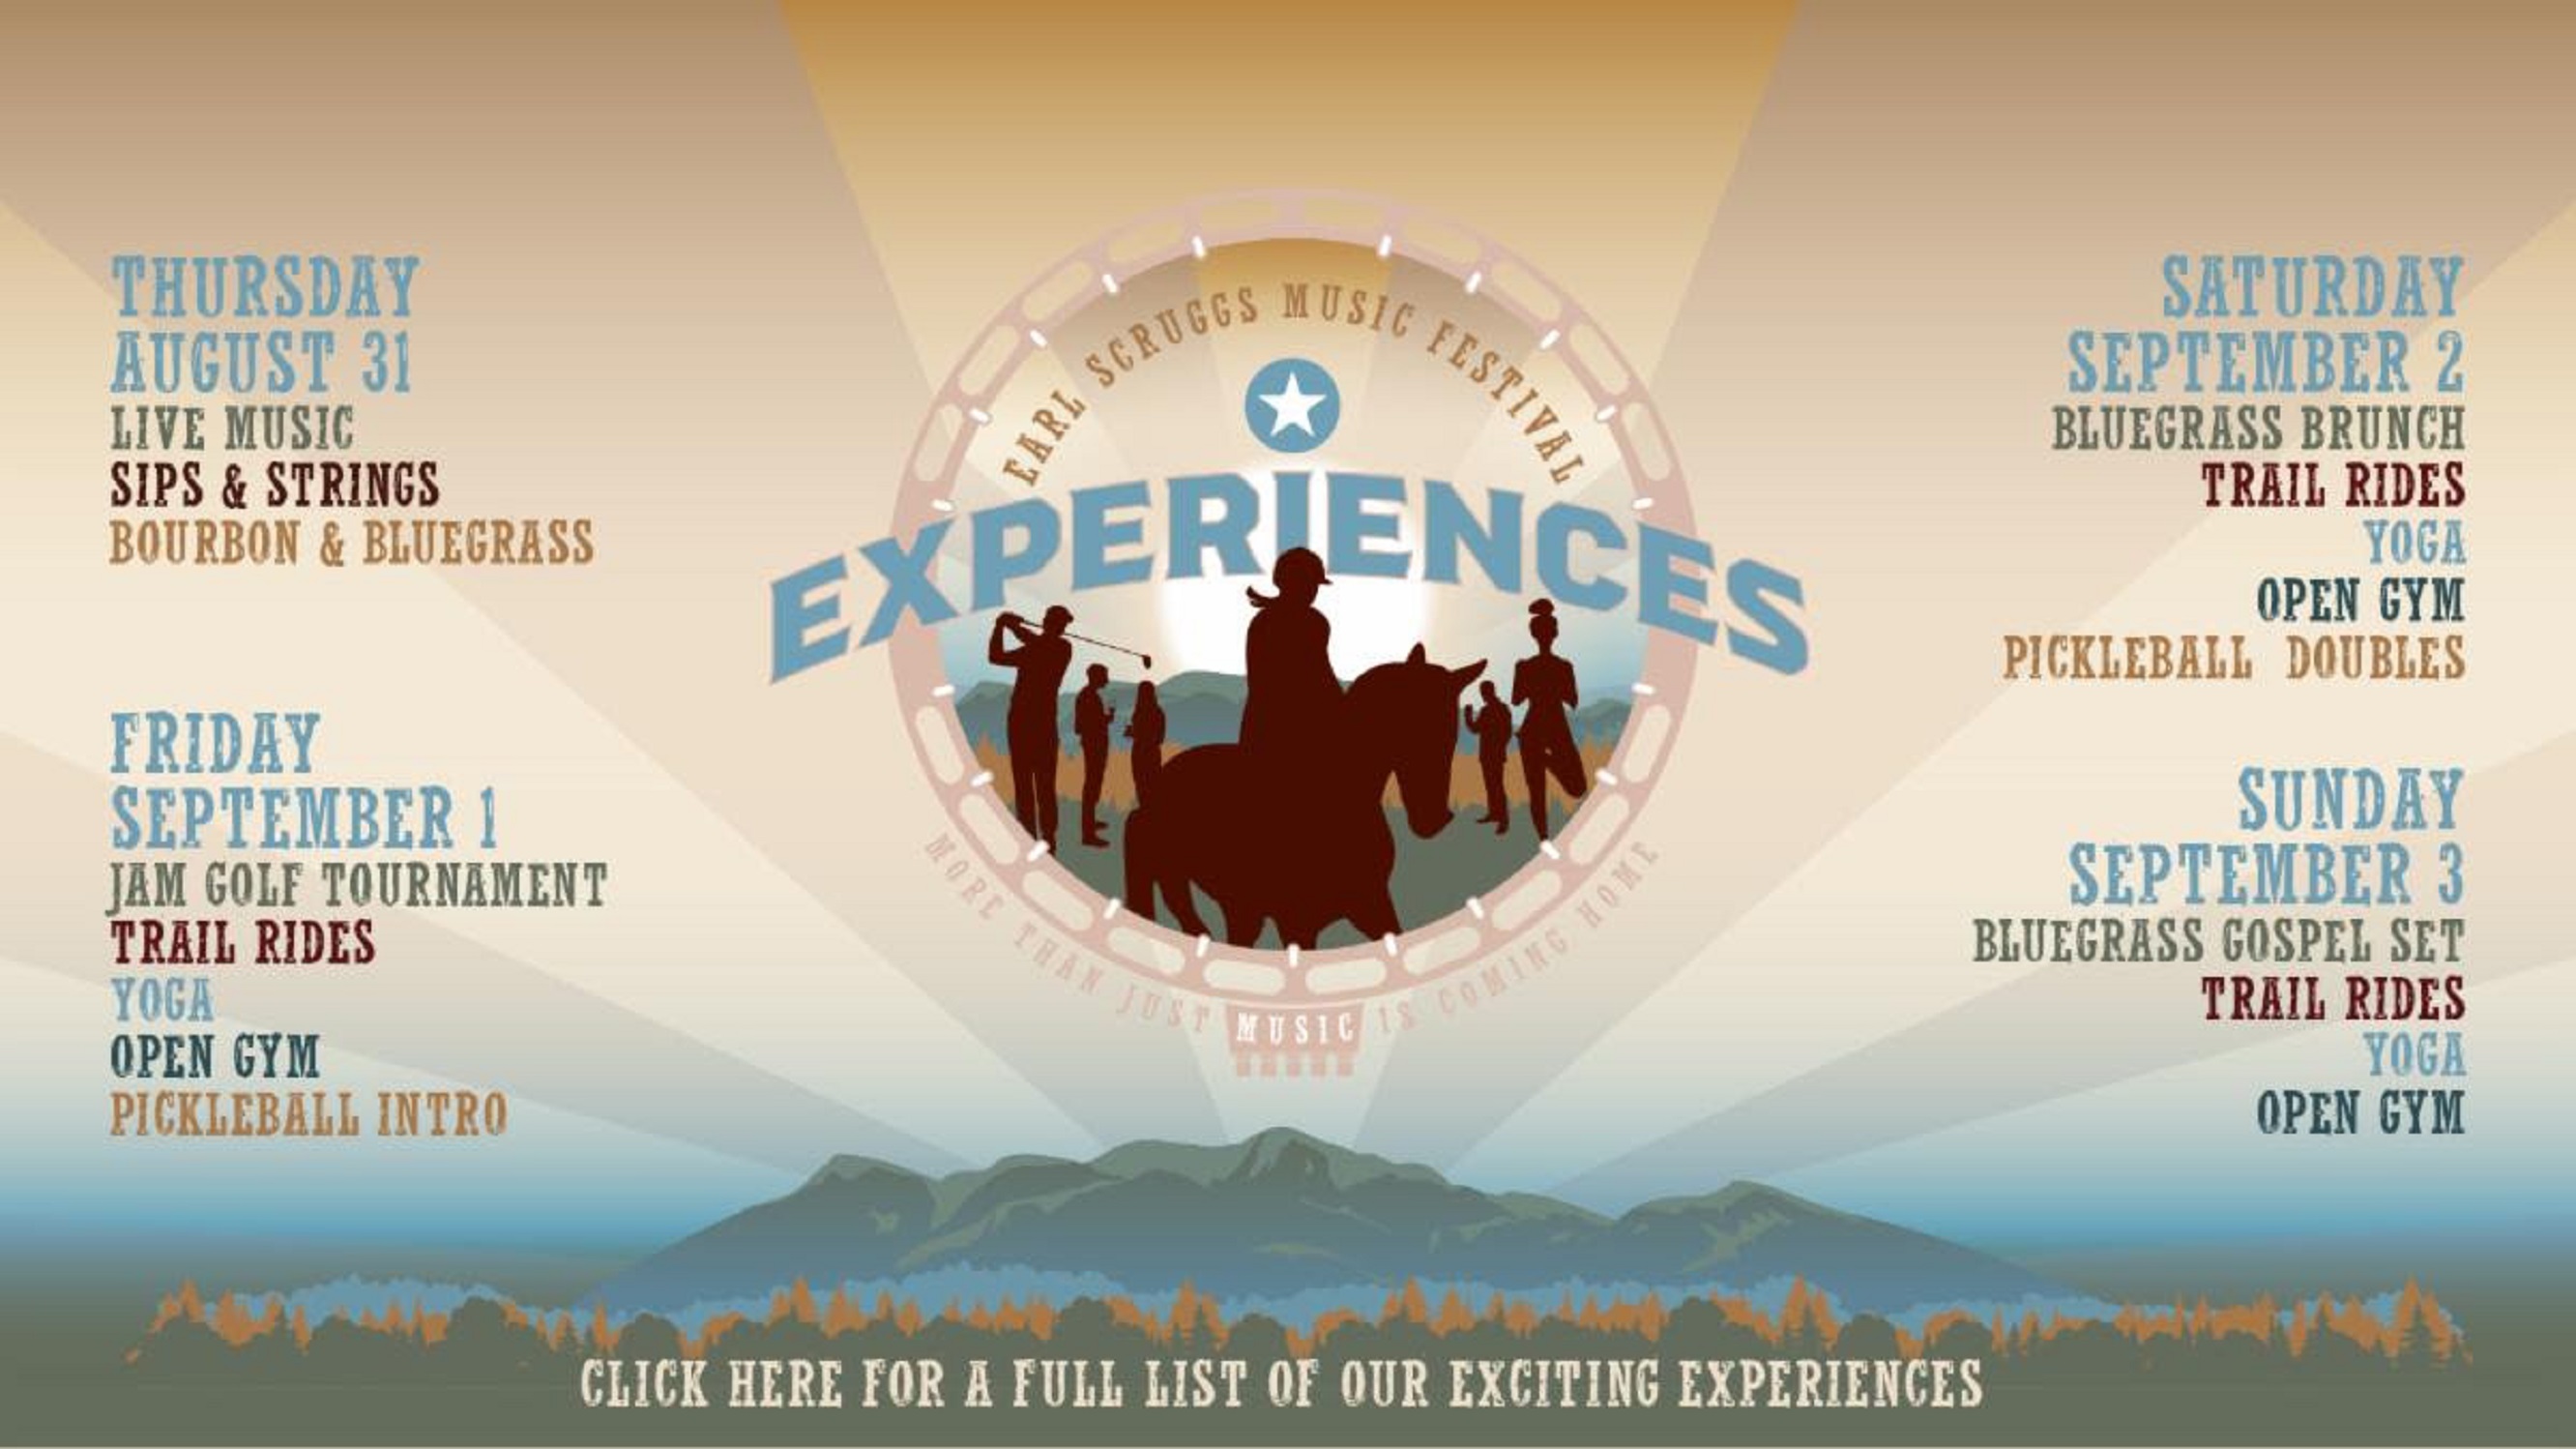 Earl Scruggs Music Festival Details On Site Experiences